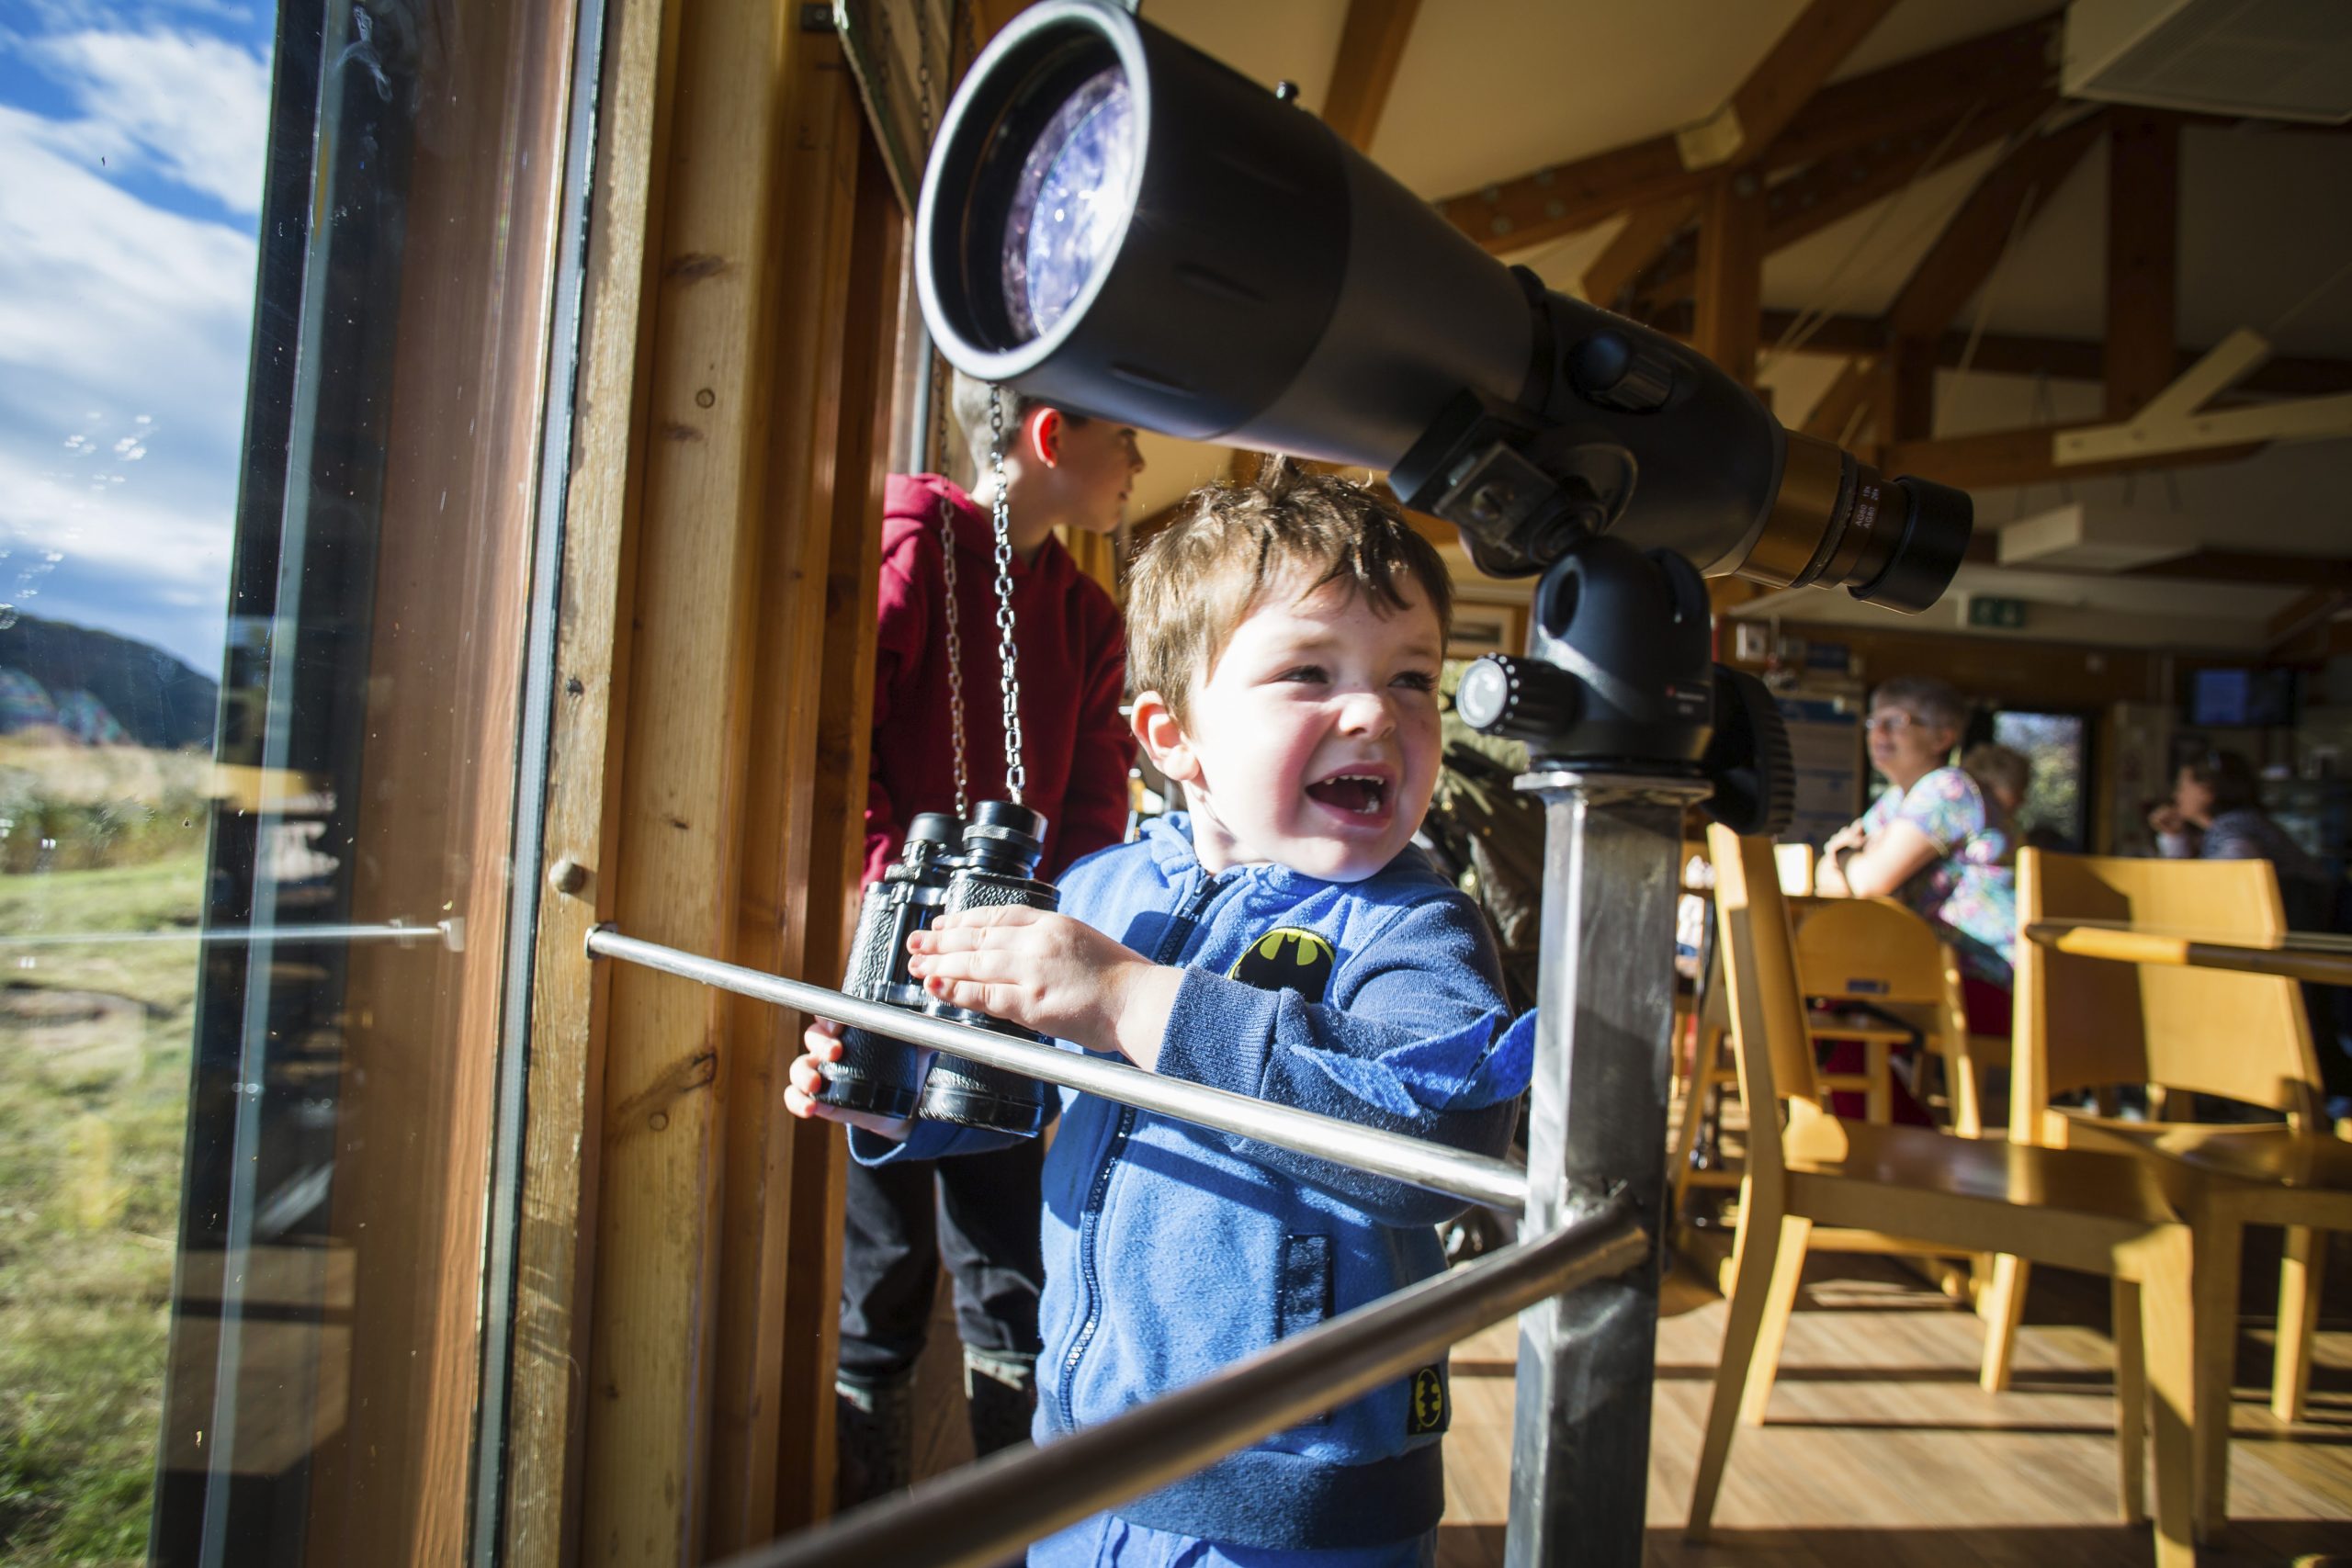 A young boy birdwatches with binoculars at Conwy RSPB Reserve, North Wales.